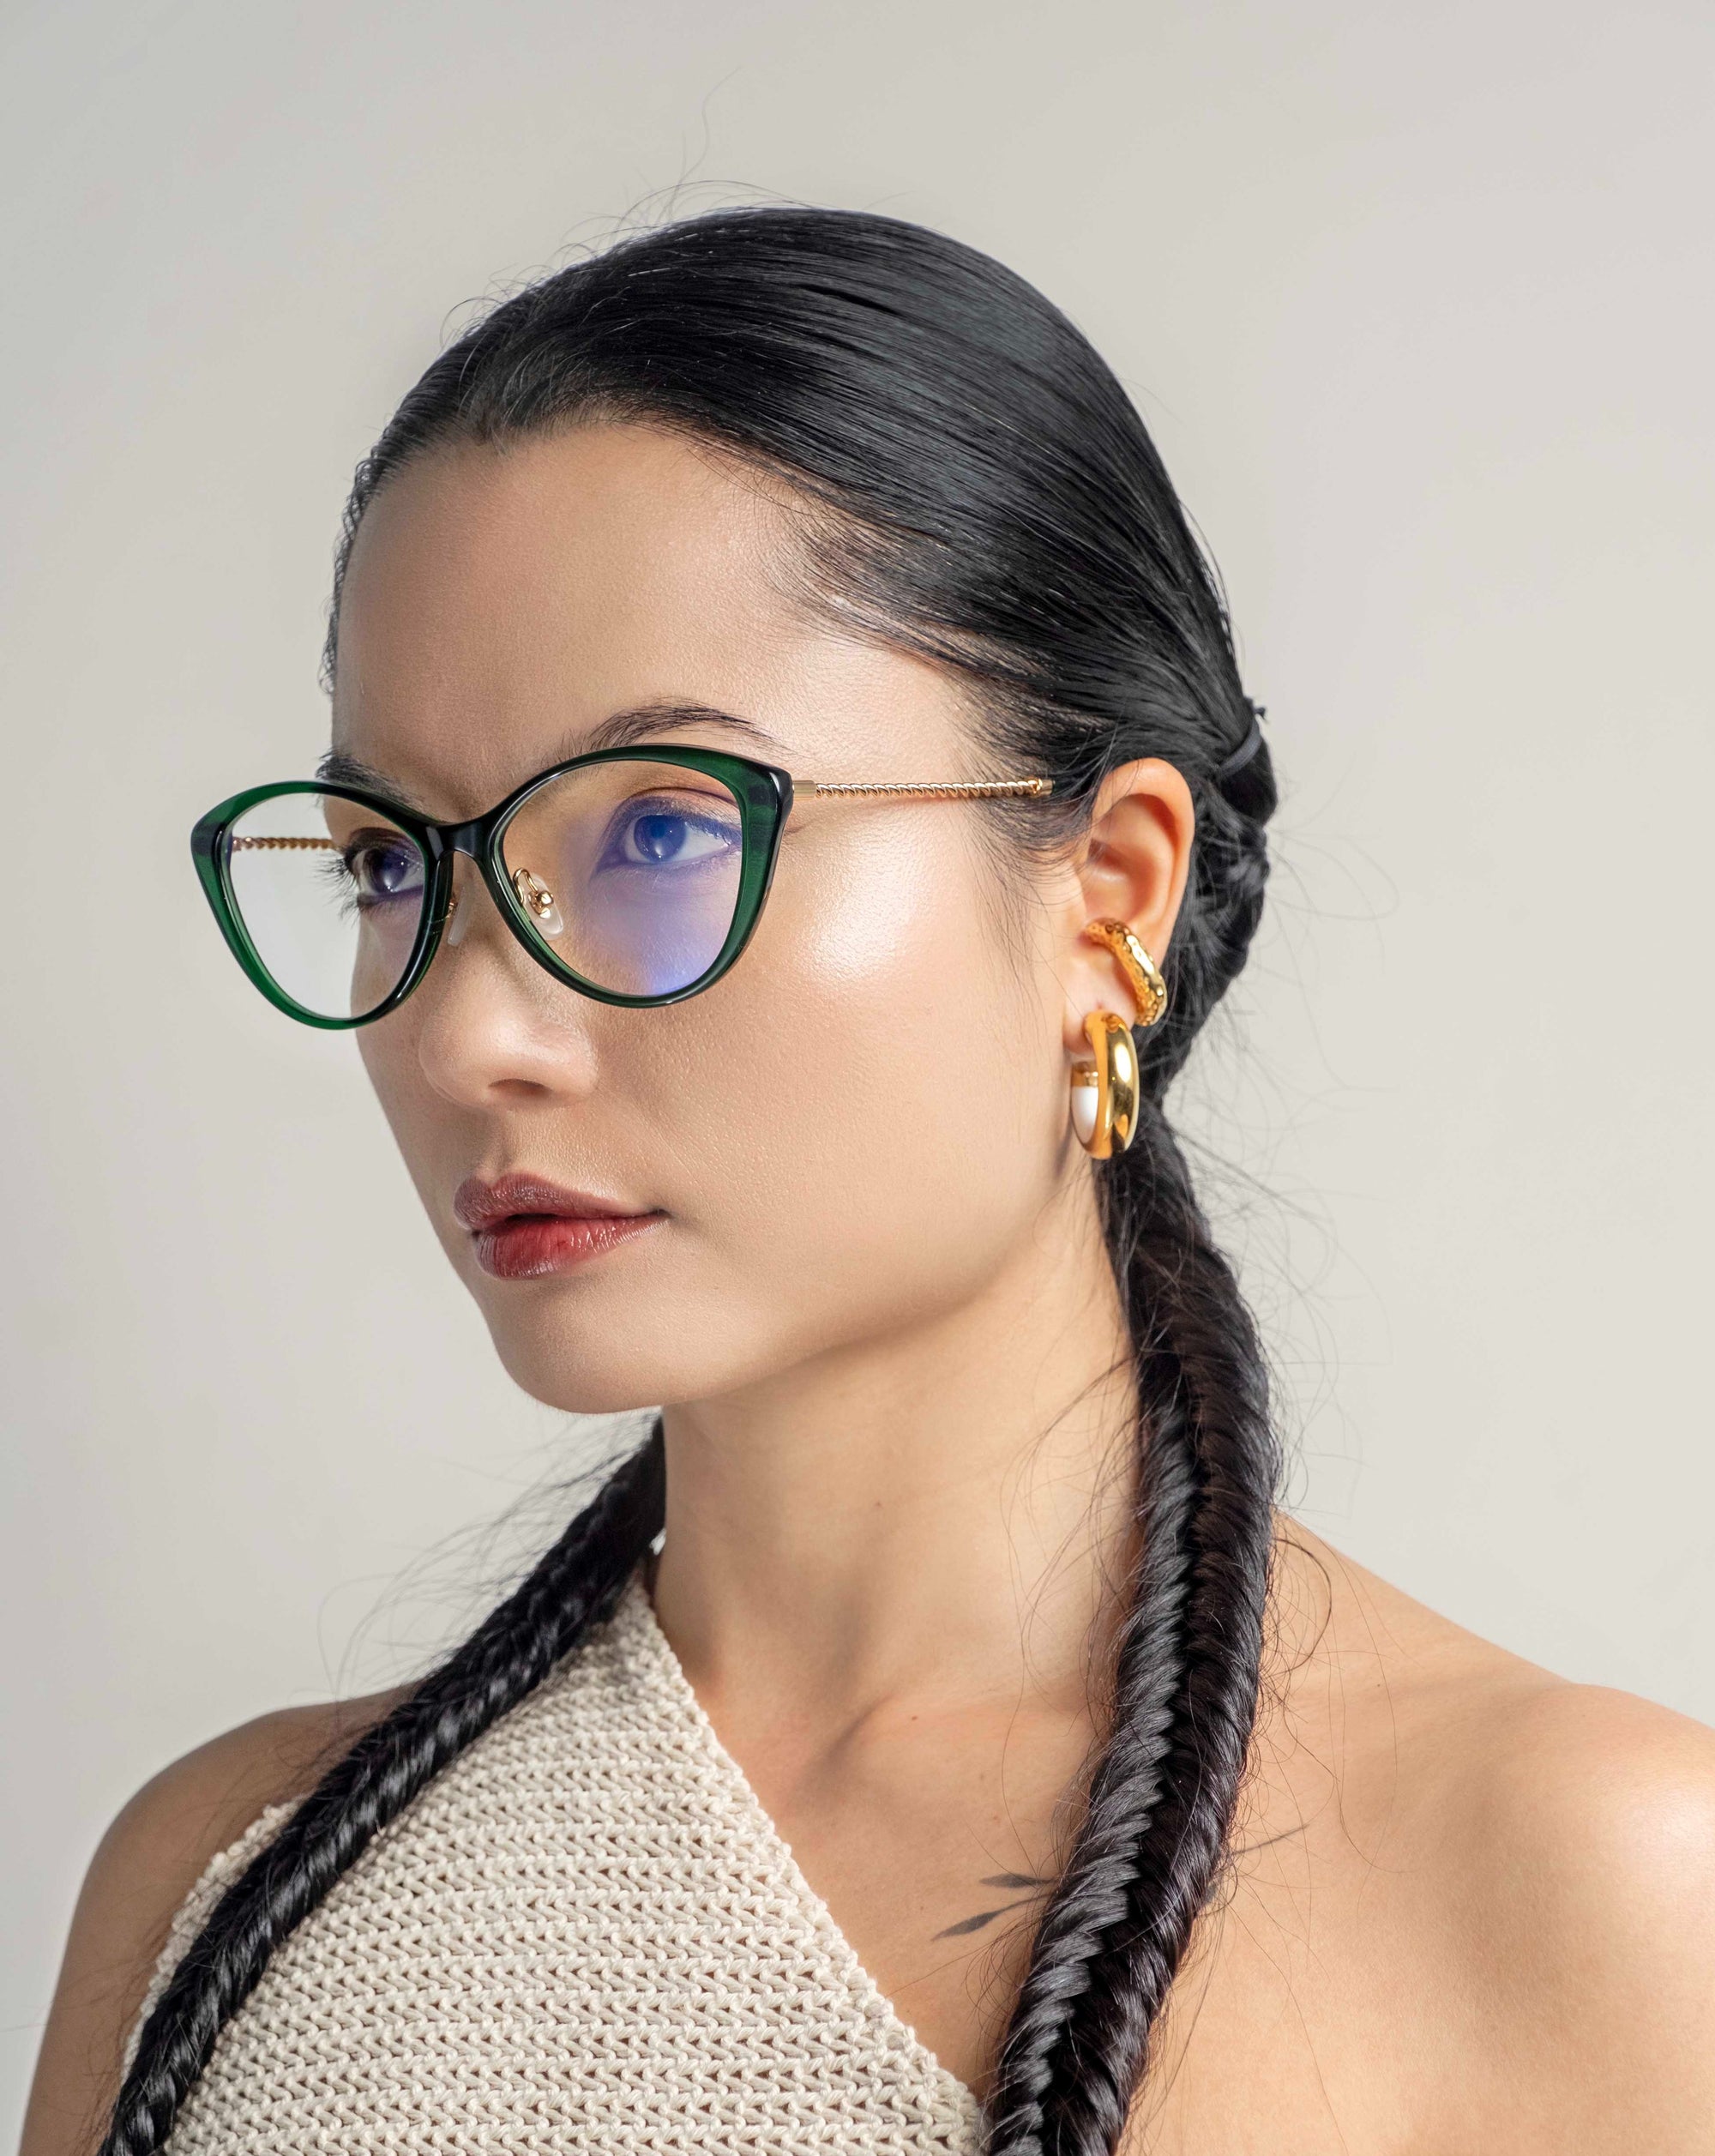 A woman with long, dark hair styled in a braided ponytail wears black cat-eye Perla II glasses by For Art's Sake® featuring blue-tinted lenses and 18-karat gold plating. She has gold hoop earrings and is dressed in a knitted beige top while standing against a plain light-colored background.